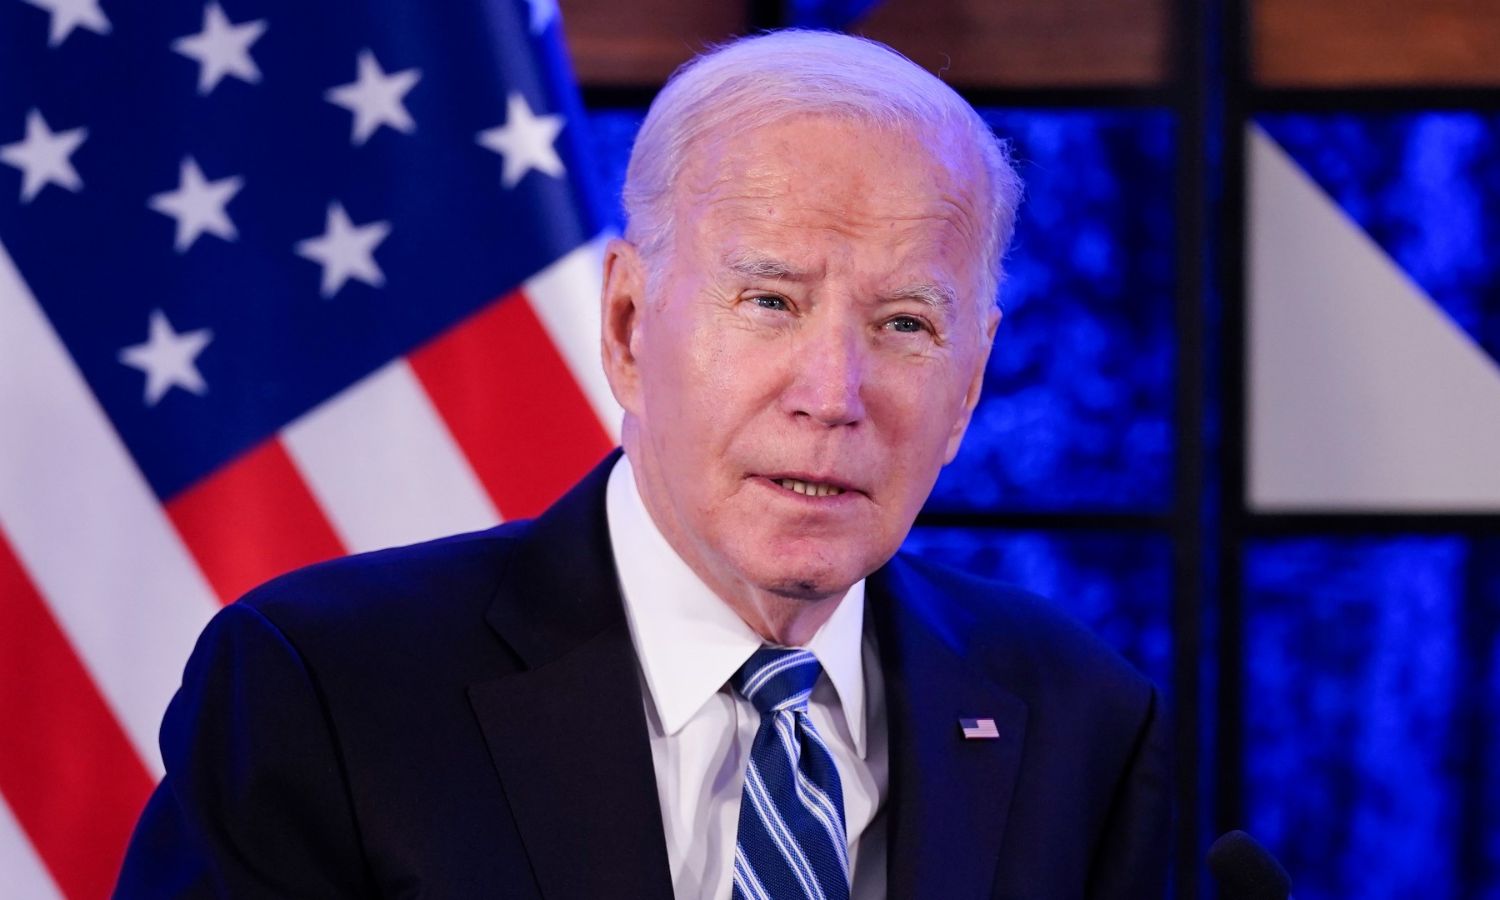 Biden and Harris to attend services for Rosalynn Carter in Georgia